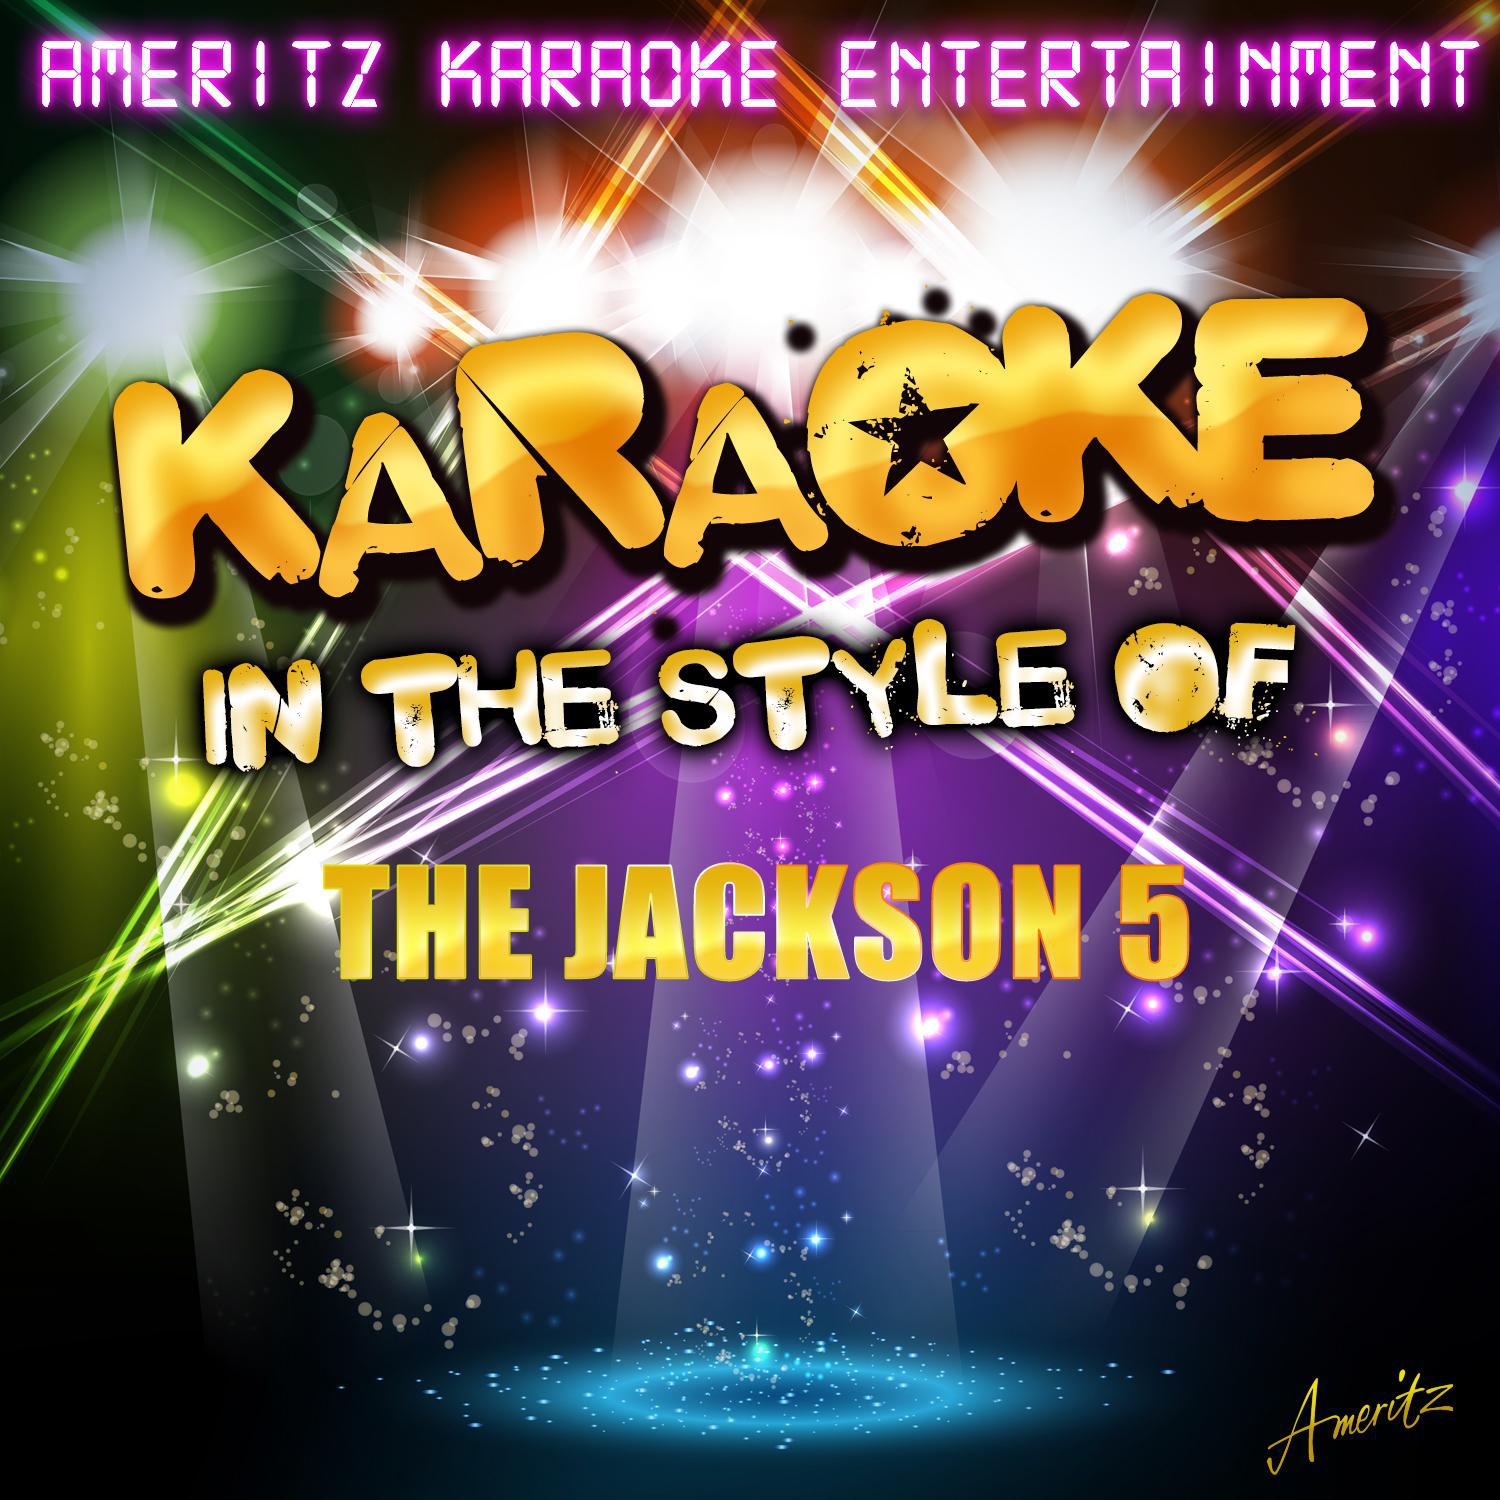 Karaoke - In the Style of the Jackson 5